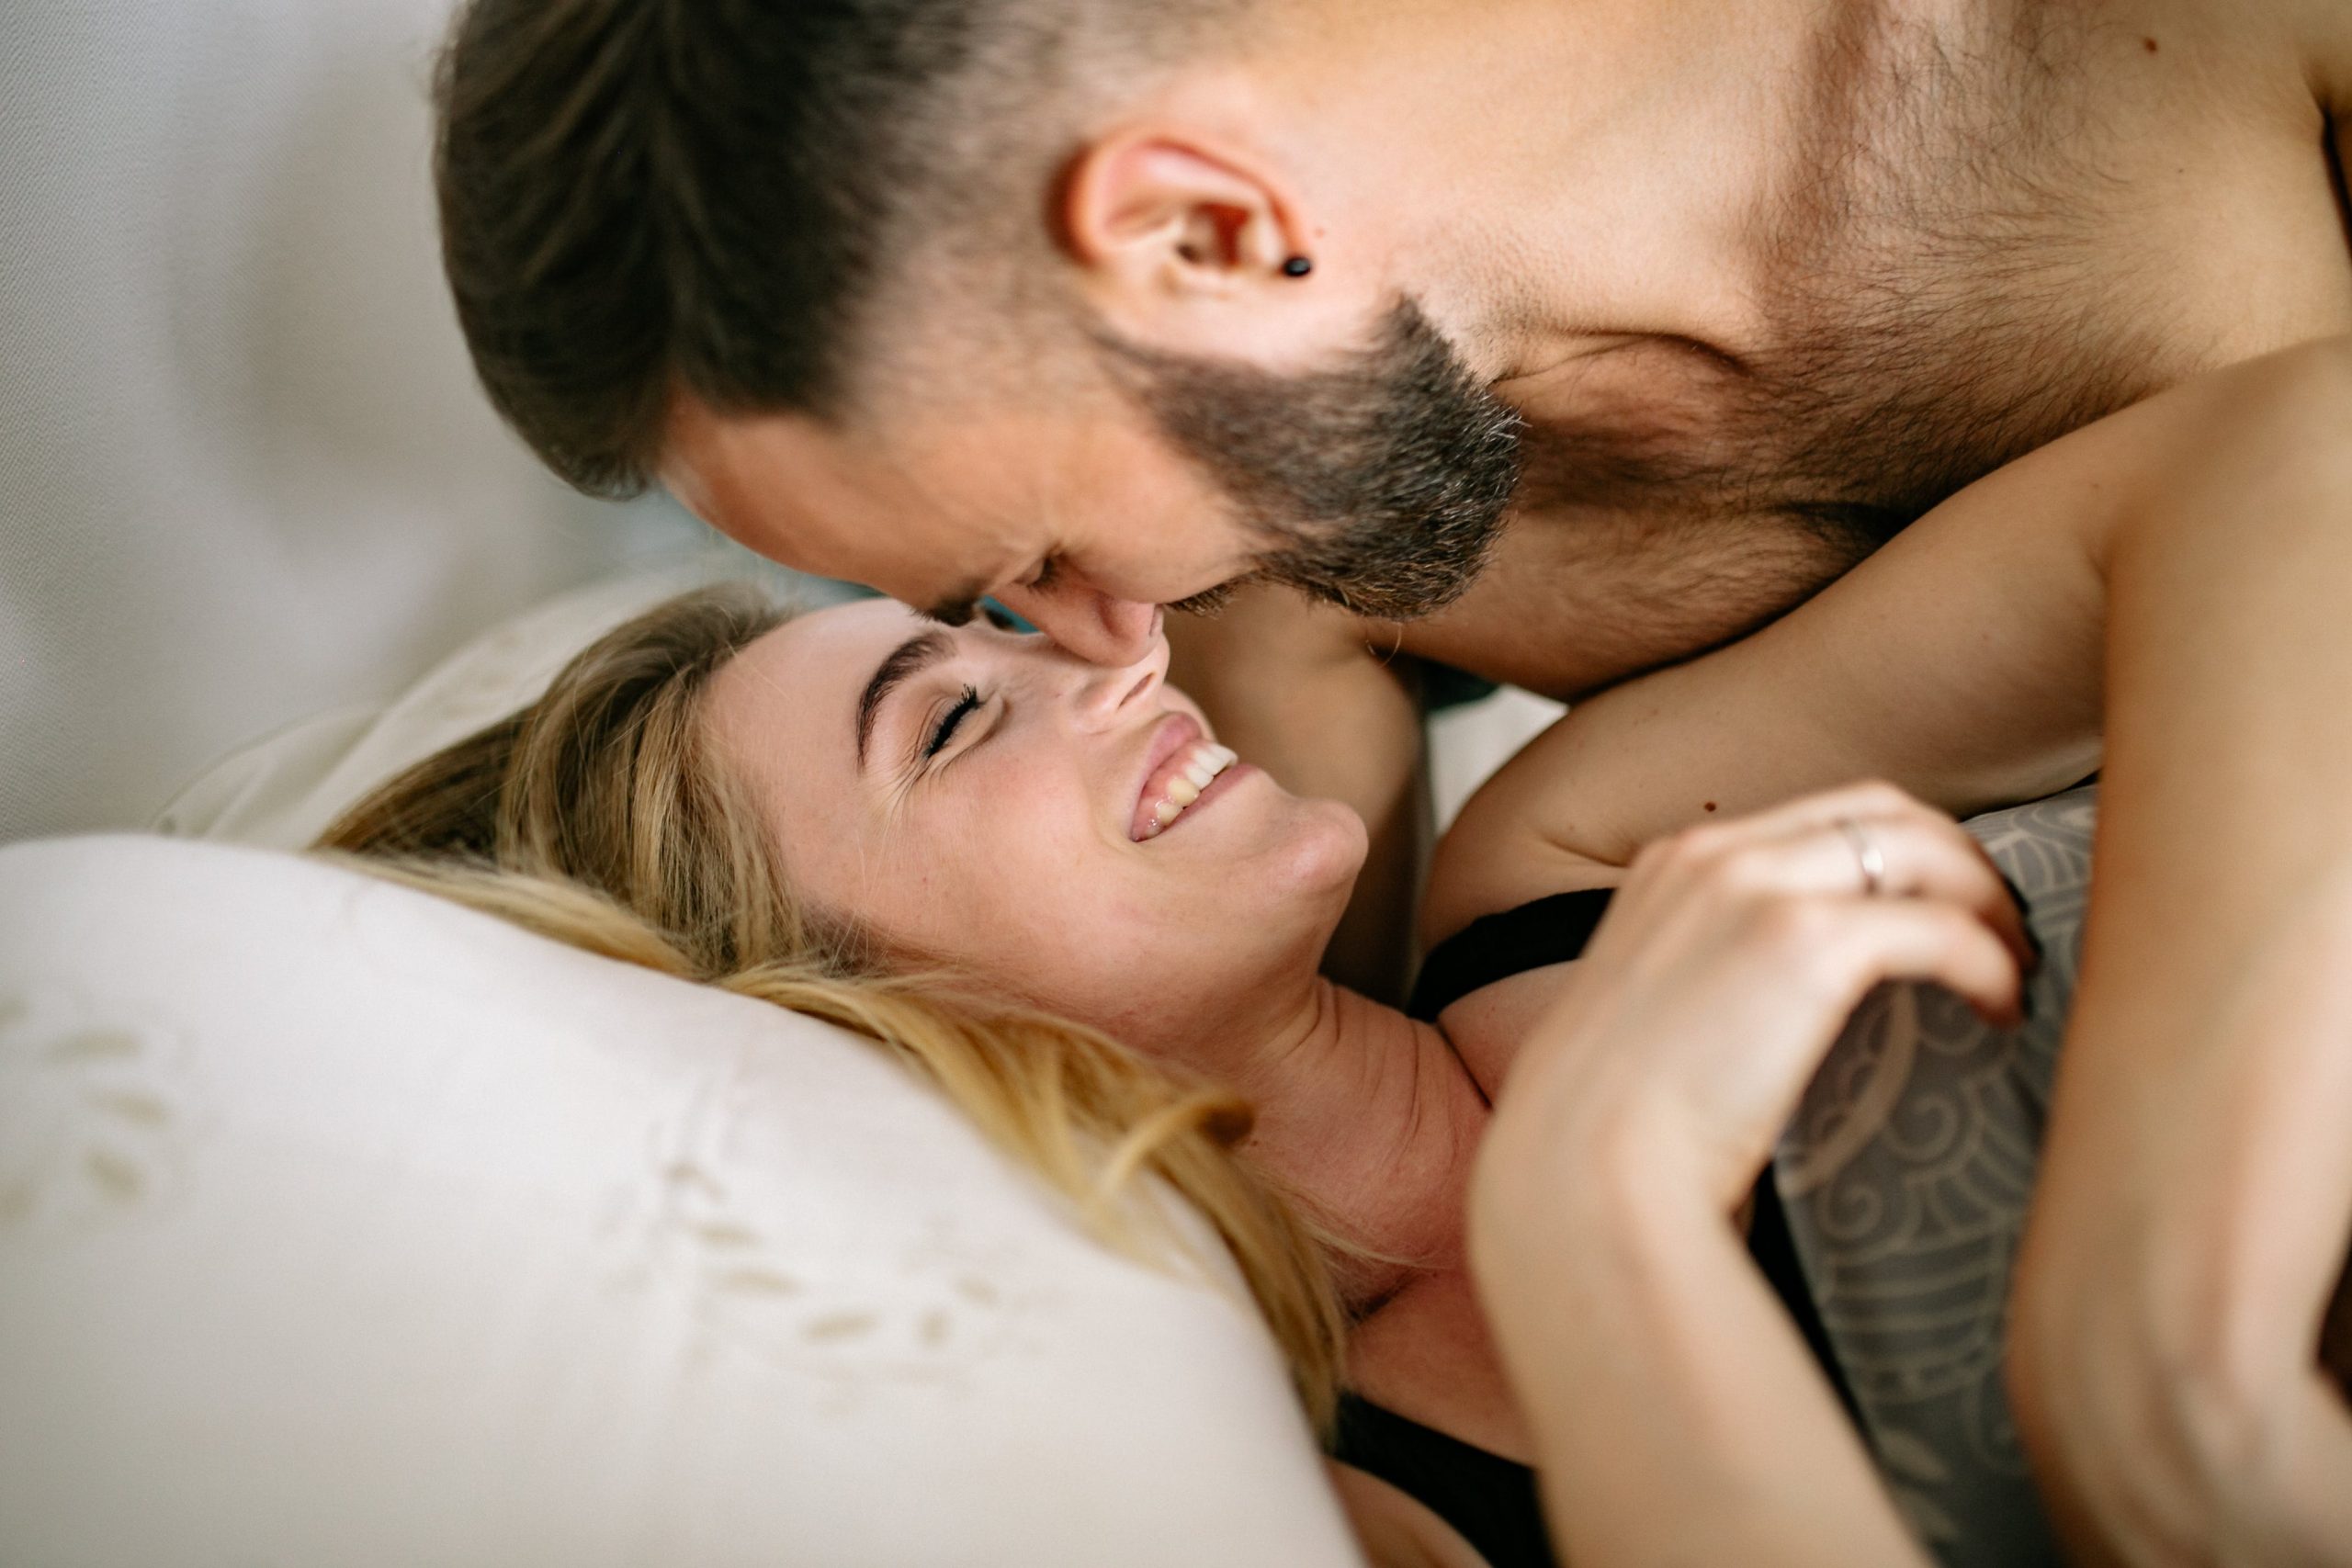 A man and woman having casual sex on the bed 